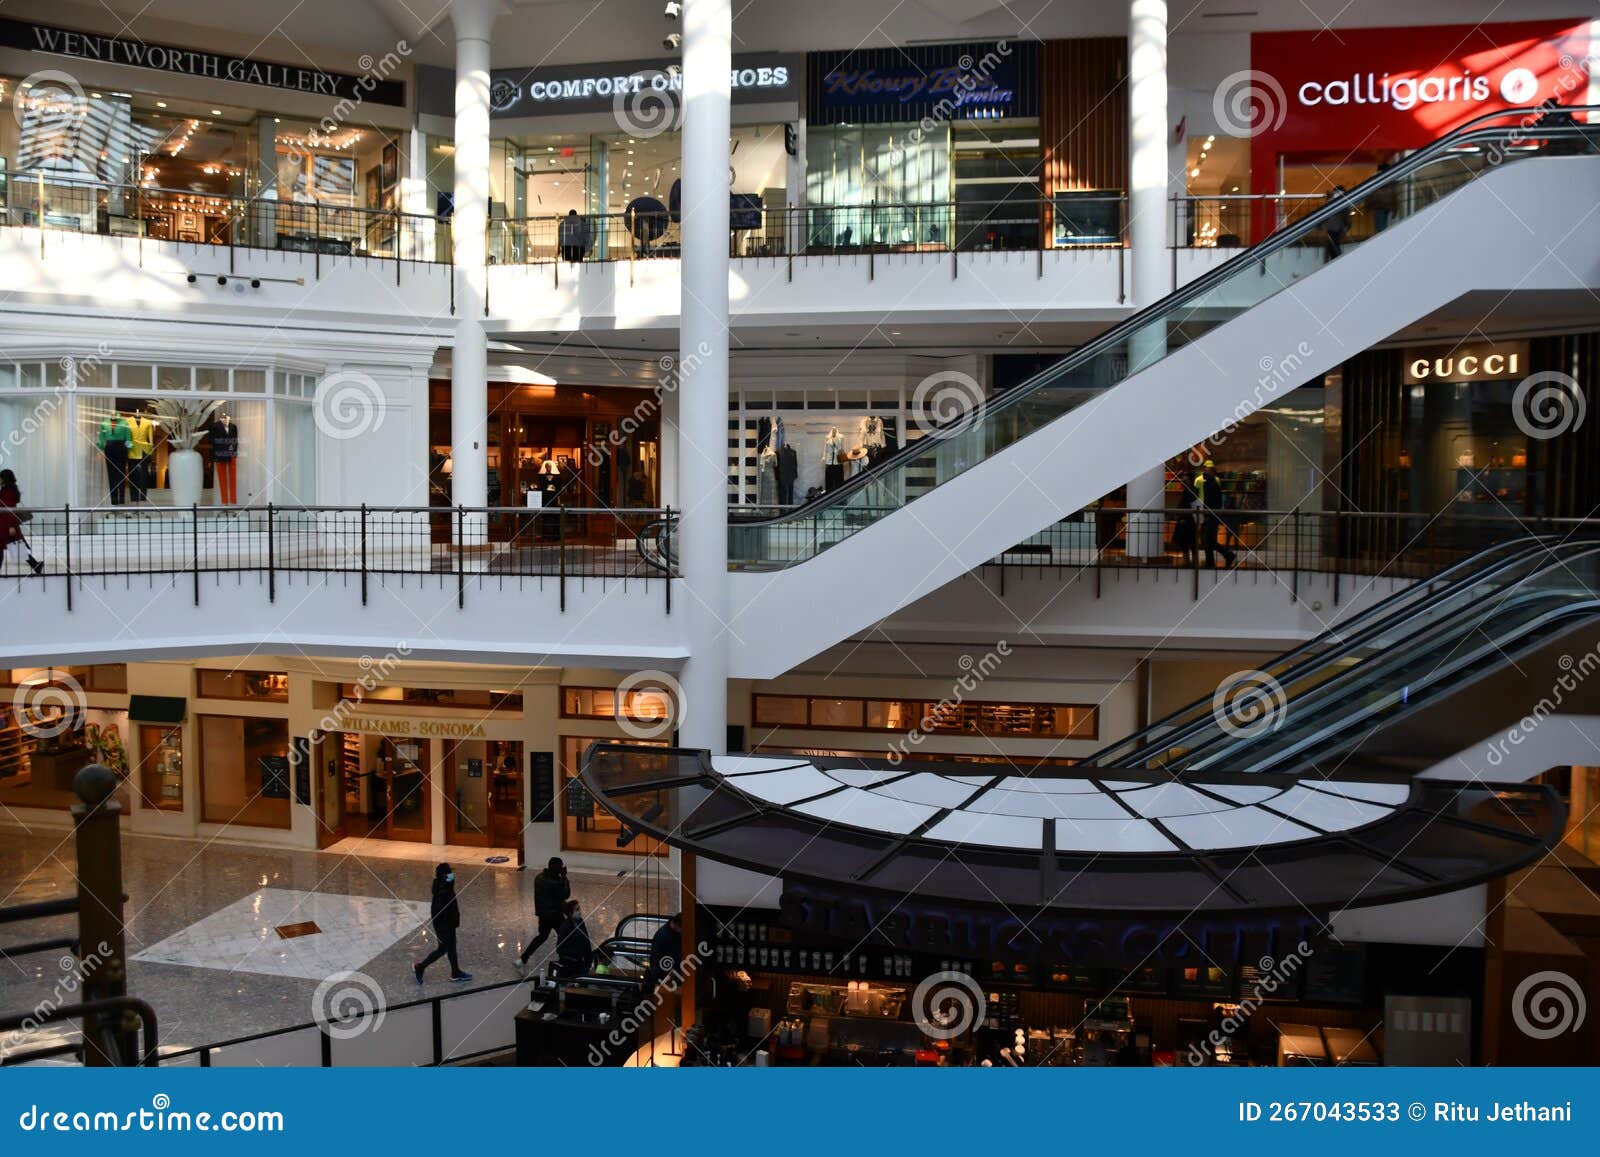 Tysons Galleria Shopping Mall in McLean, Virginia Editorial Stock Photo ...